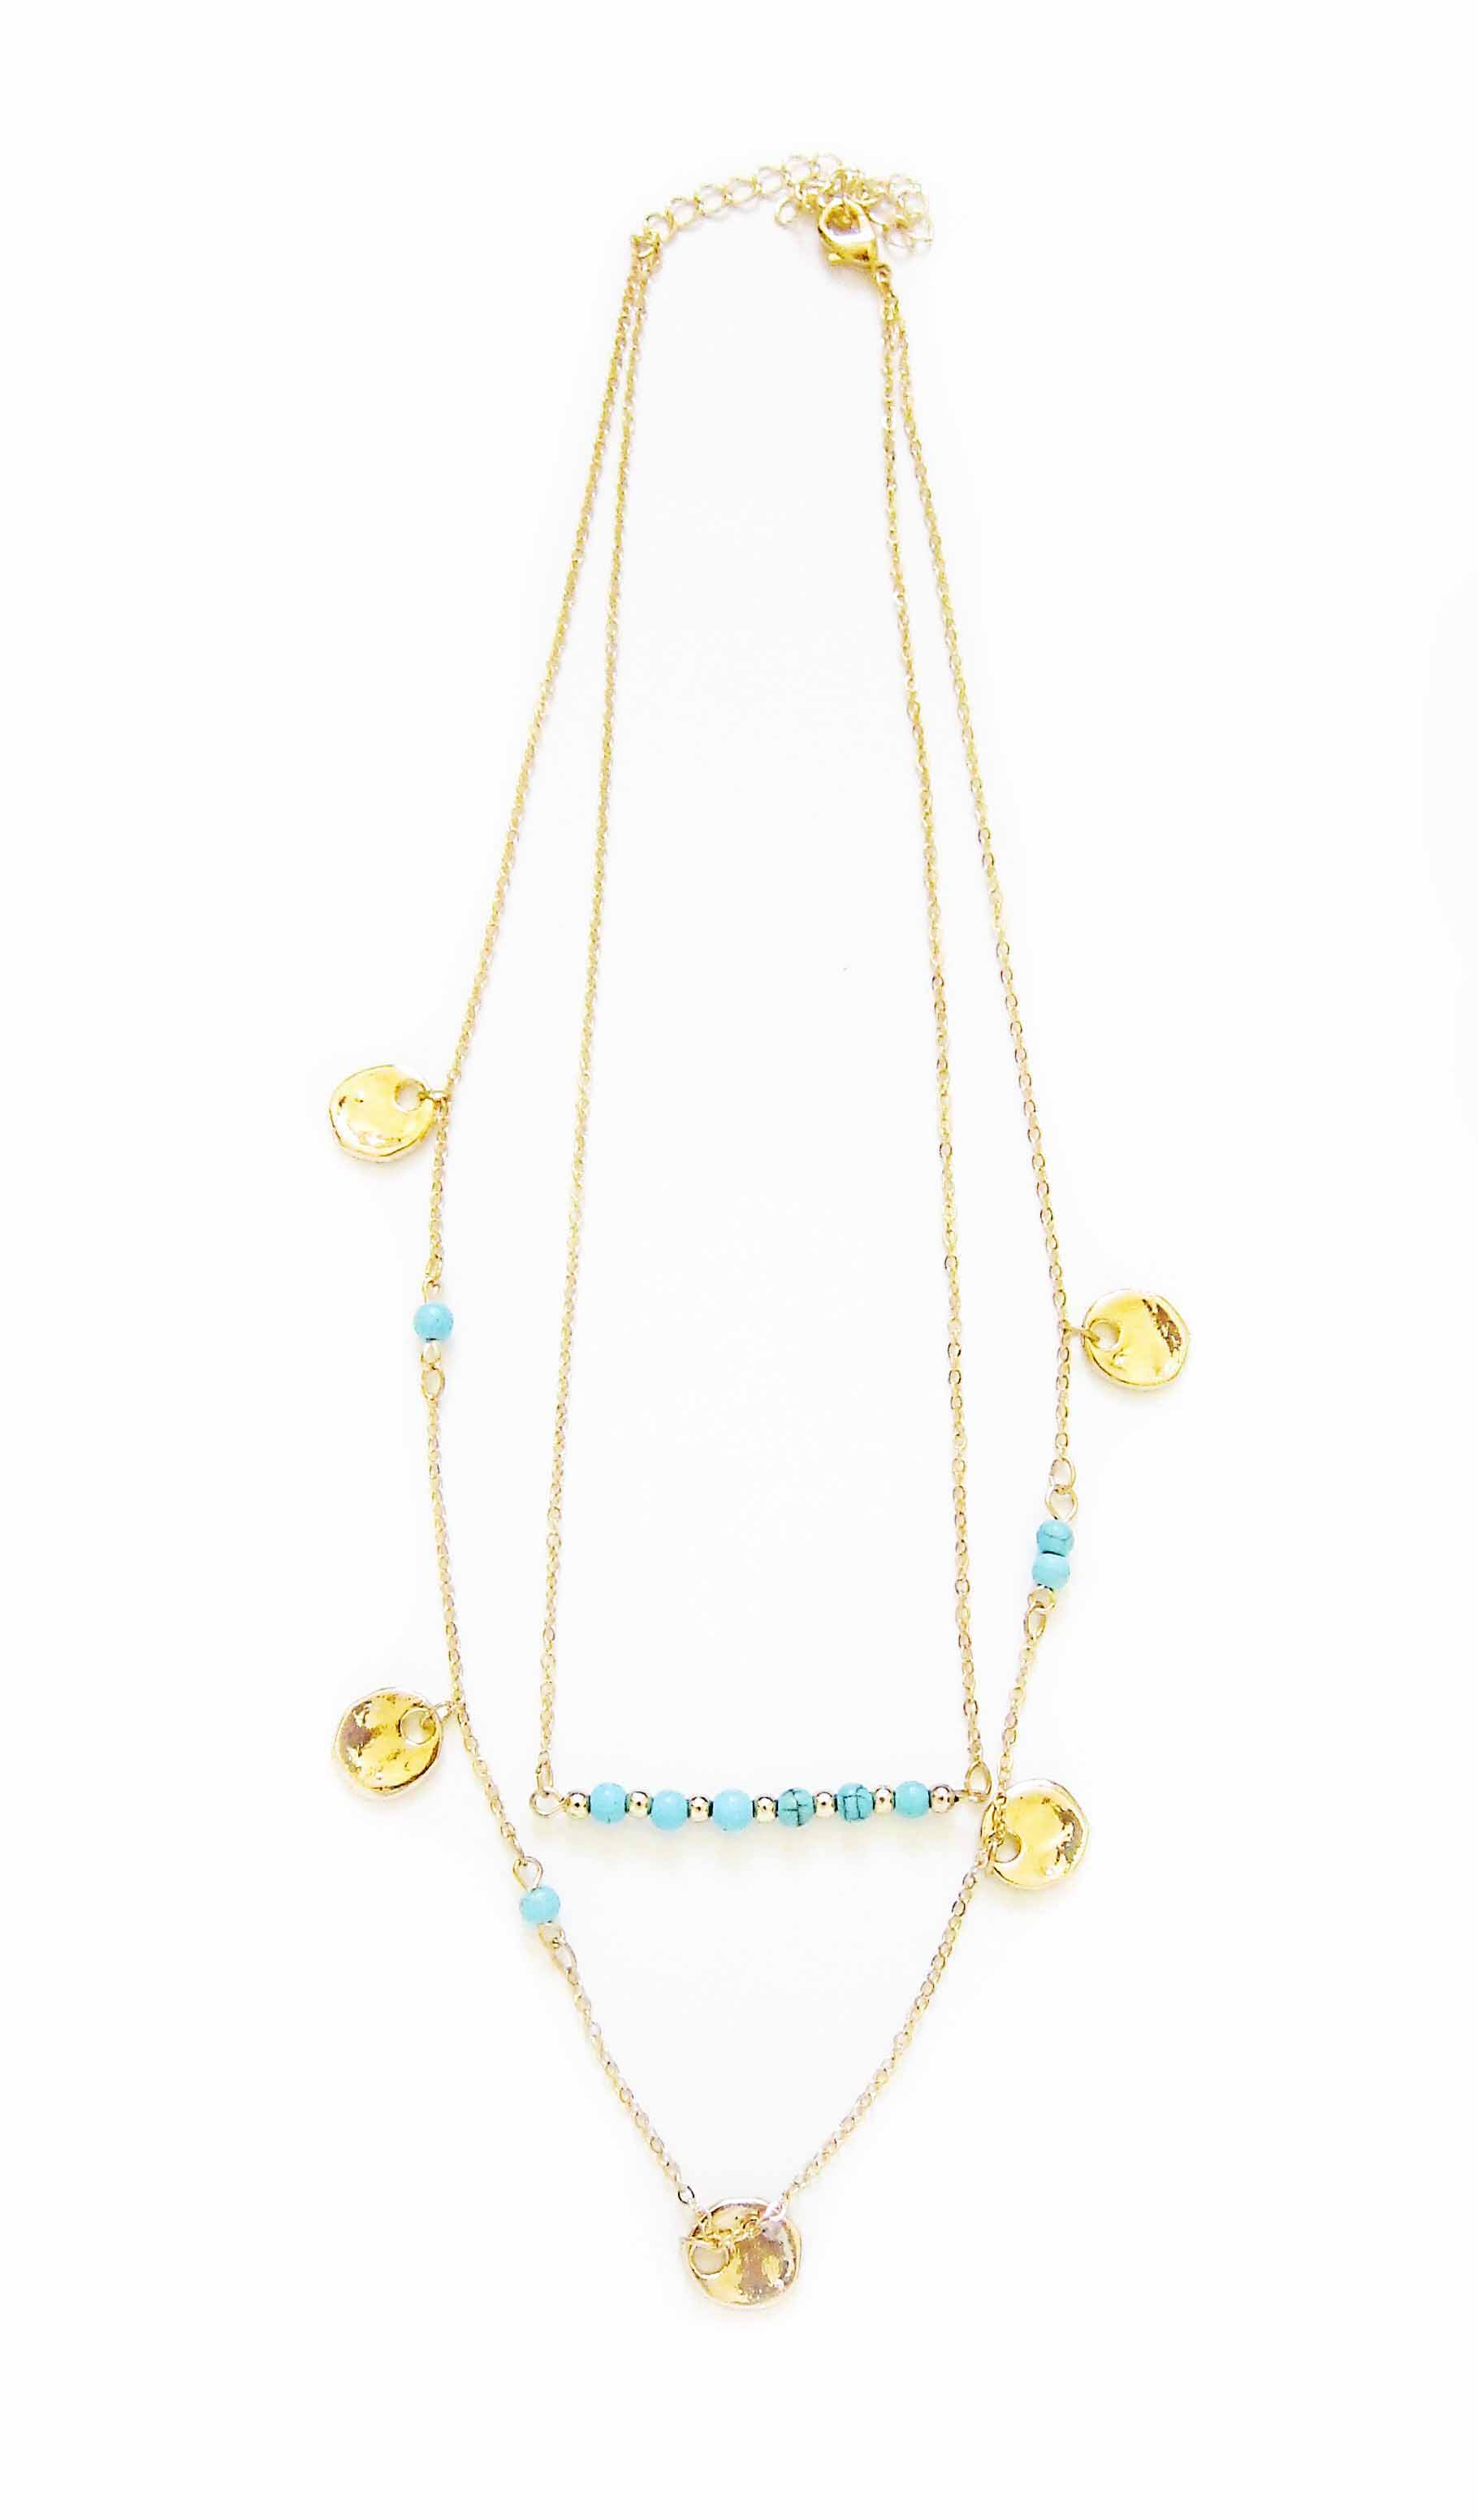 Cate & Chloe Selena Divine Layered Turquoise Necklace